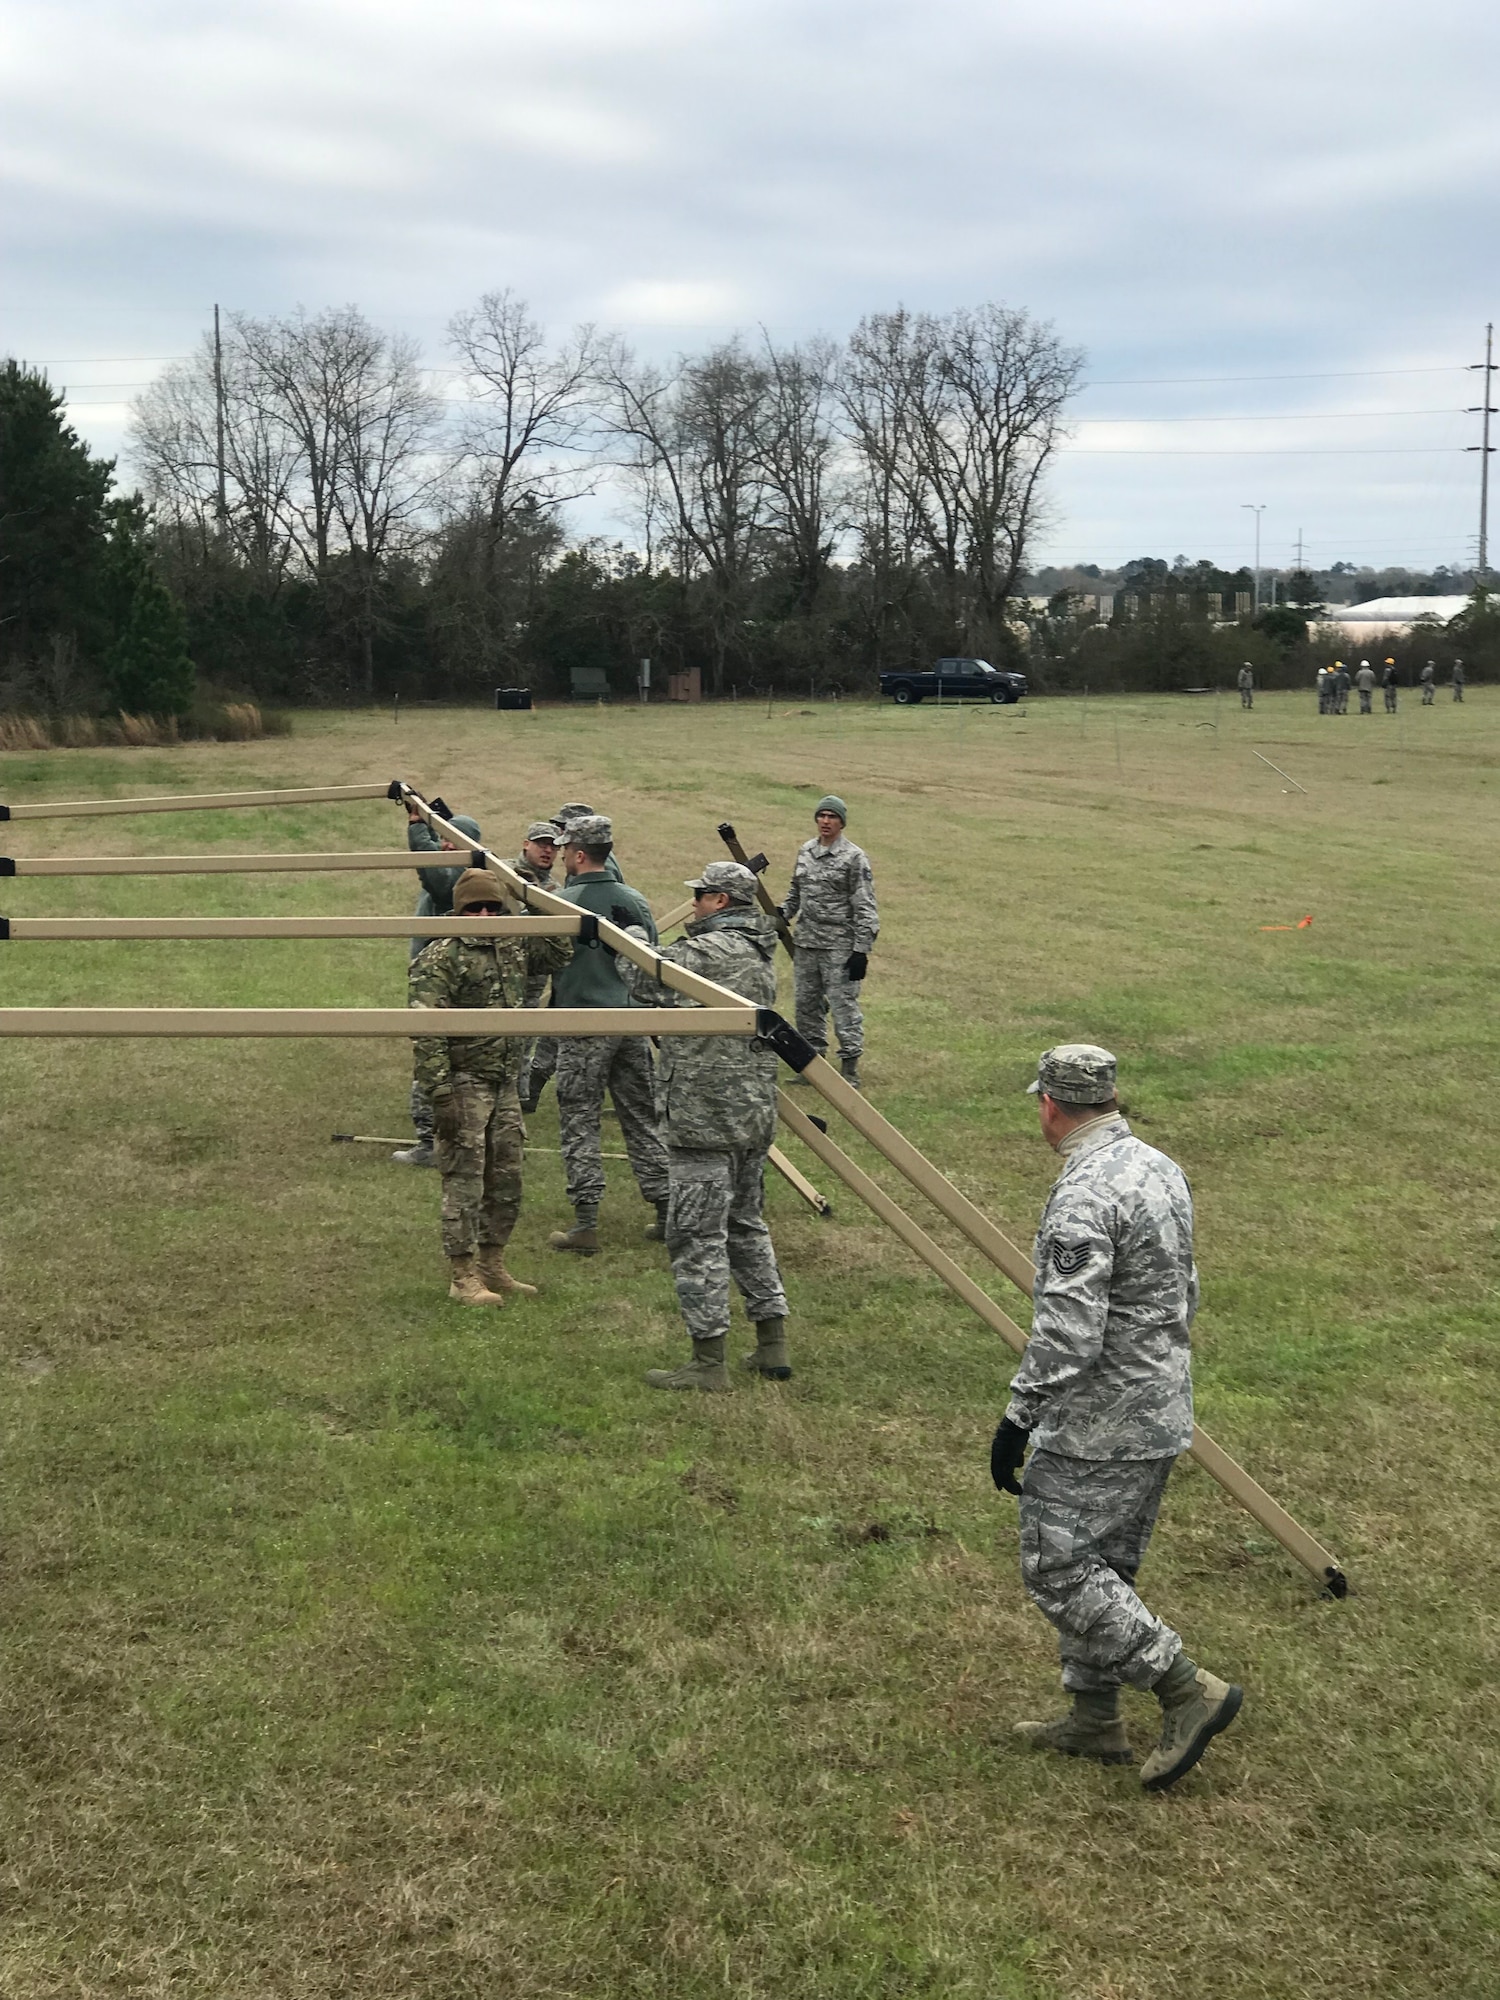 A mobile deployment tent erected is erected by members of the 263rd Combat Communications Squadron for their participation in the Combat Communications (CBC) Rodeo while at Robins Air Force Base, Georgia, Mar. 4, 2019. The CBC Rodeo is a Nationwide training exercise that brings together Combat Communications Squadrons from across the country to train in techniques and skills while networking to increase the potential success of future deployments.